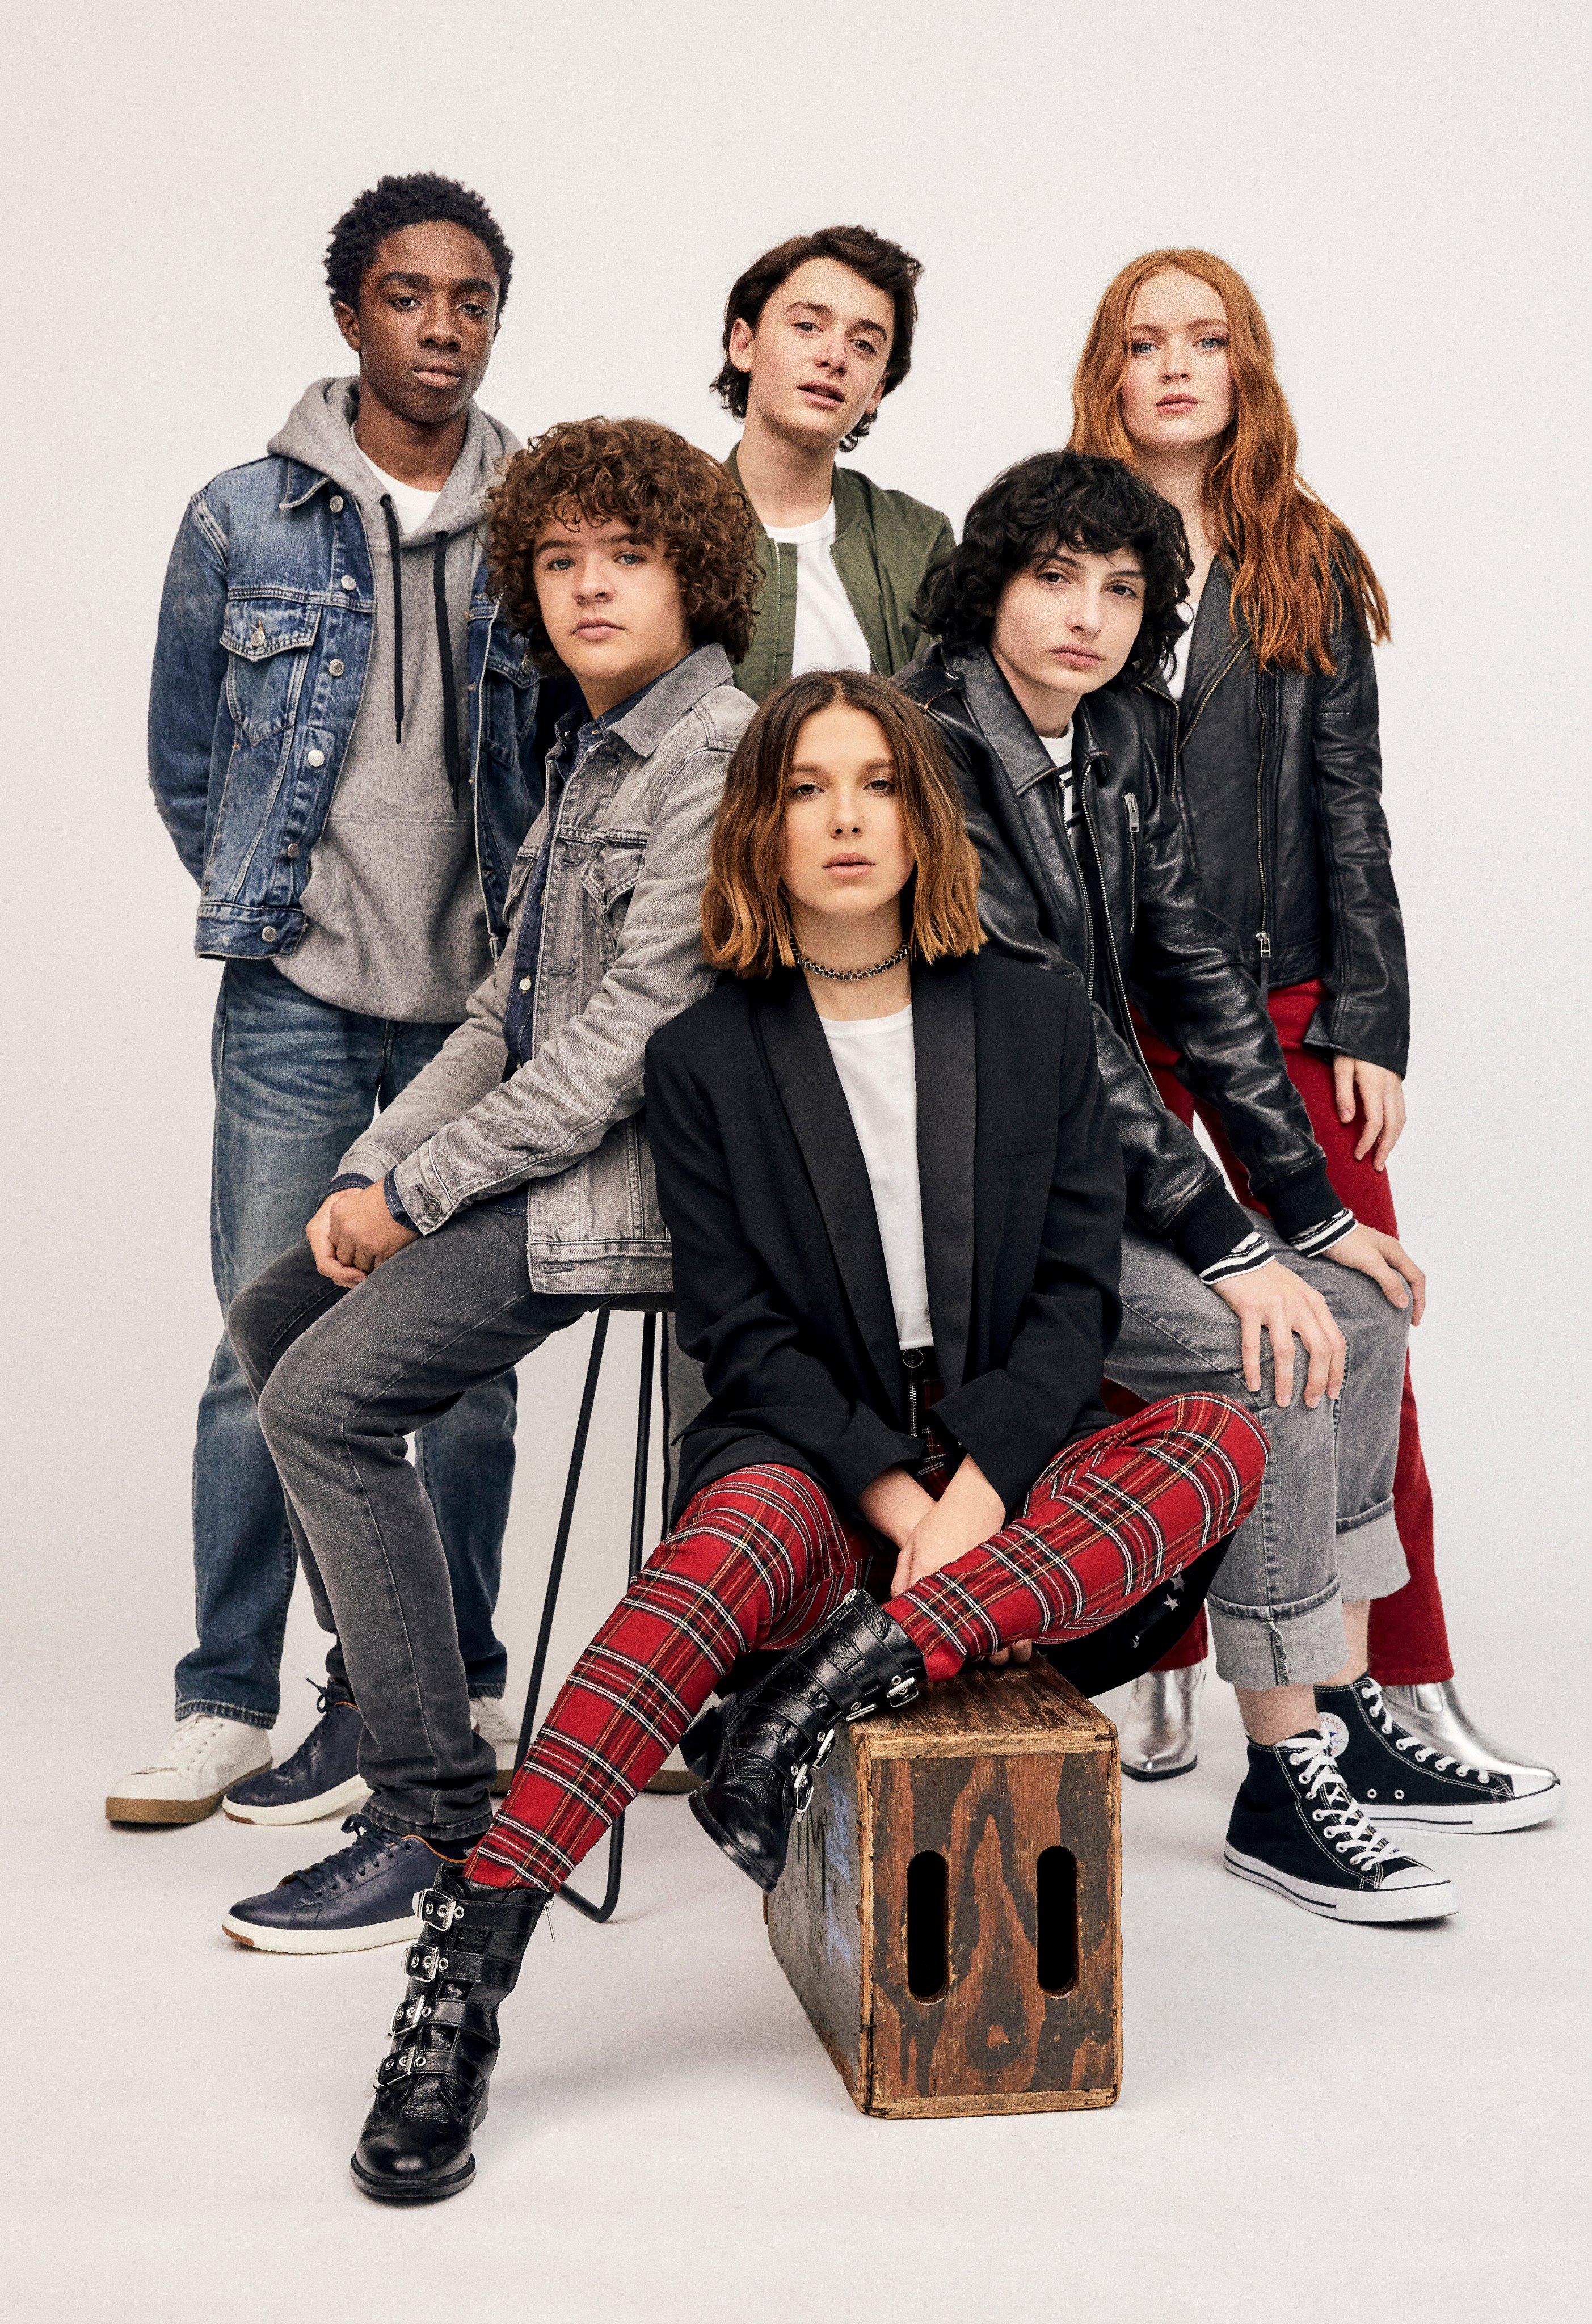 Sadie Sink and the Stranger Things cast Stone Columbia Photohoot Sink Photo